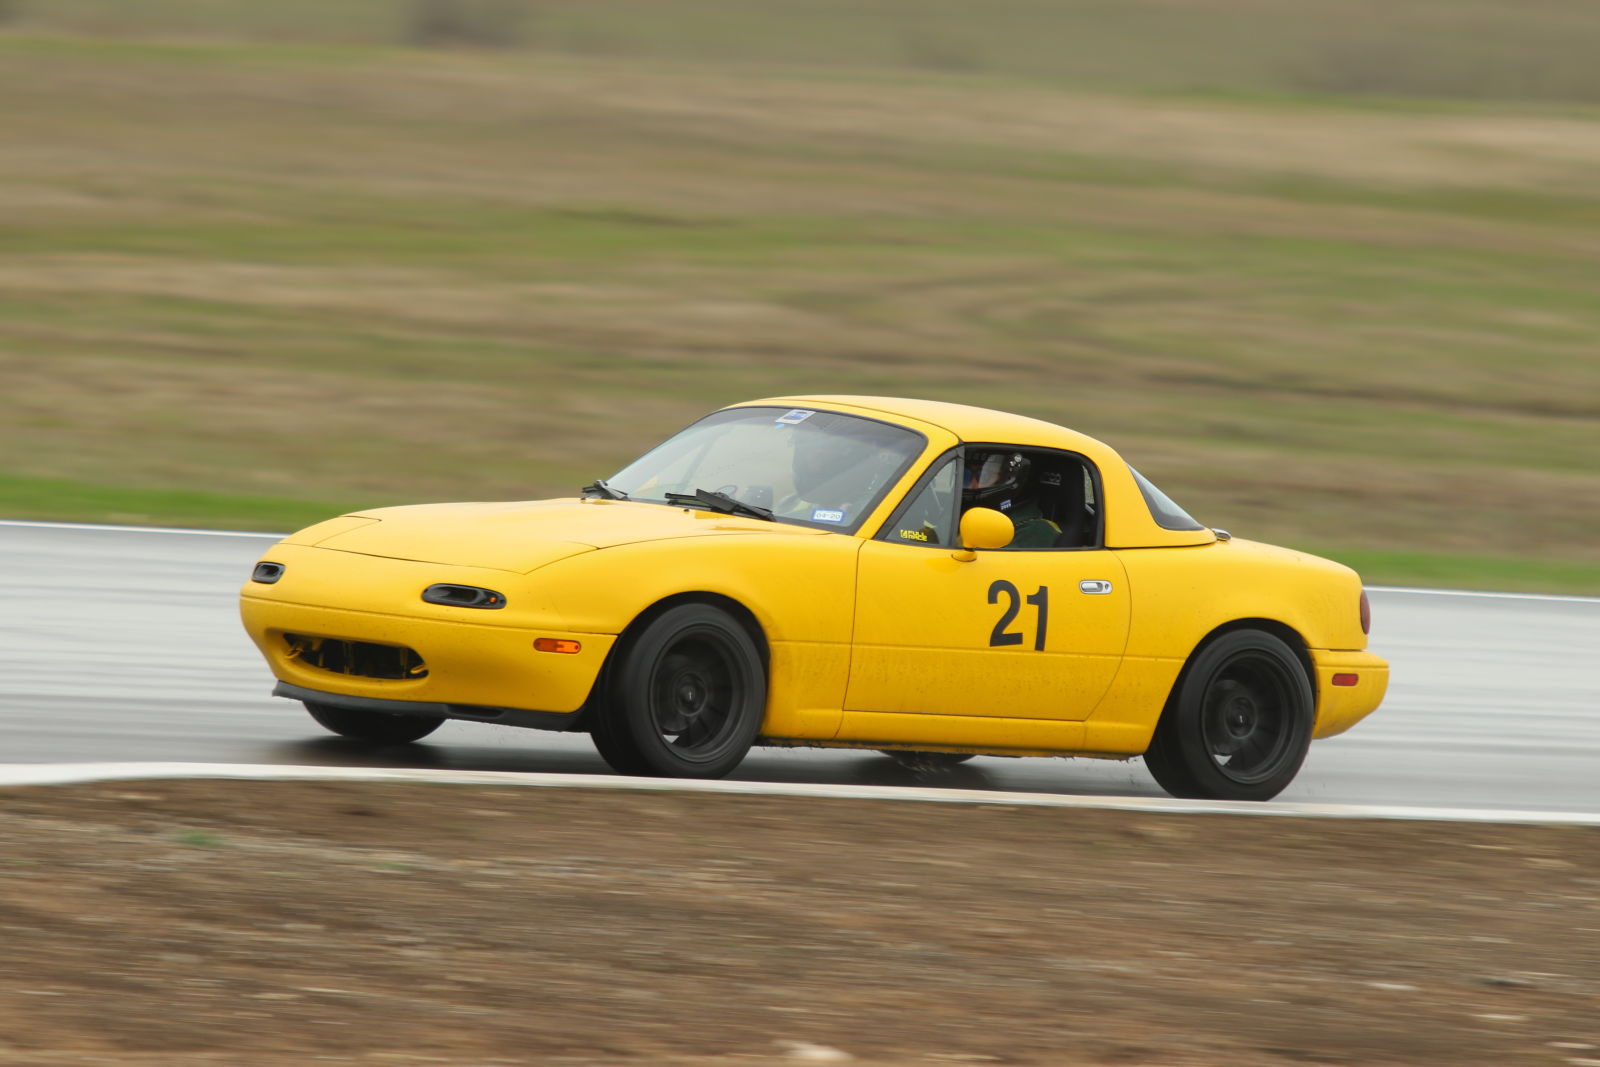 Illustration for article titled Miata in the wet